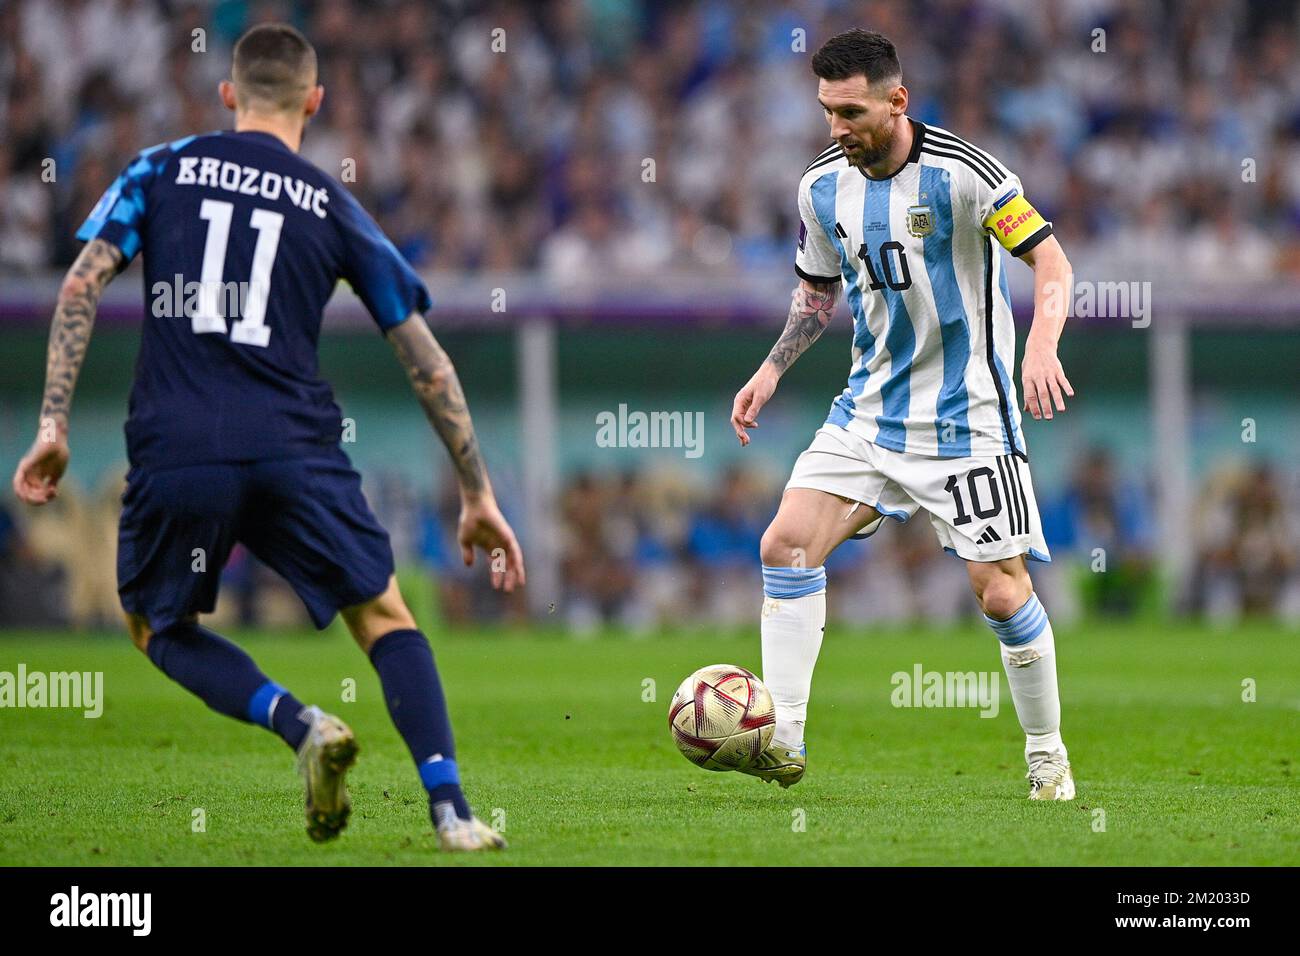 LUSAIL CITY, QATAR - DECEMBER 13: Marcelo Brozovic of Croatia and Lionel Messi of Argentina during the Semi Final - FIFA World Cup Qatar 2022 match between Argentina and Croatia at the Lusail Stadium on December 13, 2022 in Lusail City, Qatar (Photo by Pablo Morano/BSR Agency) Stock Photo